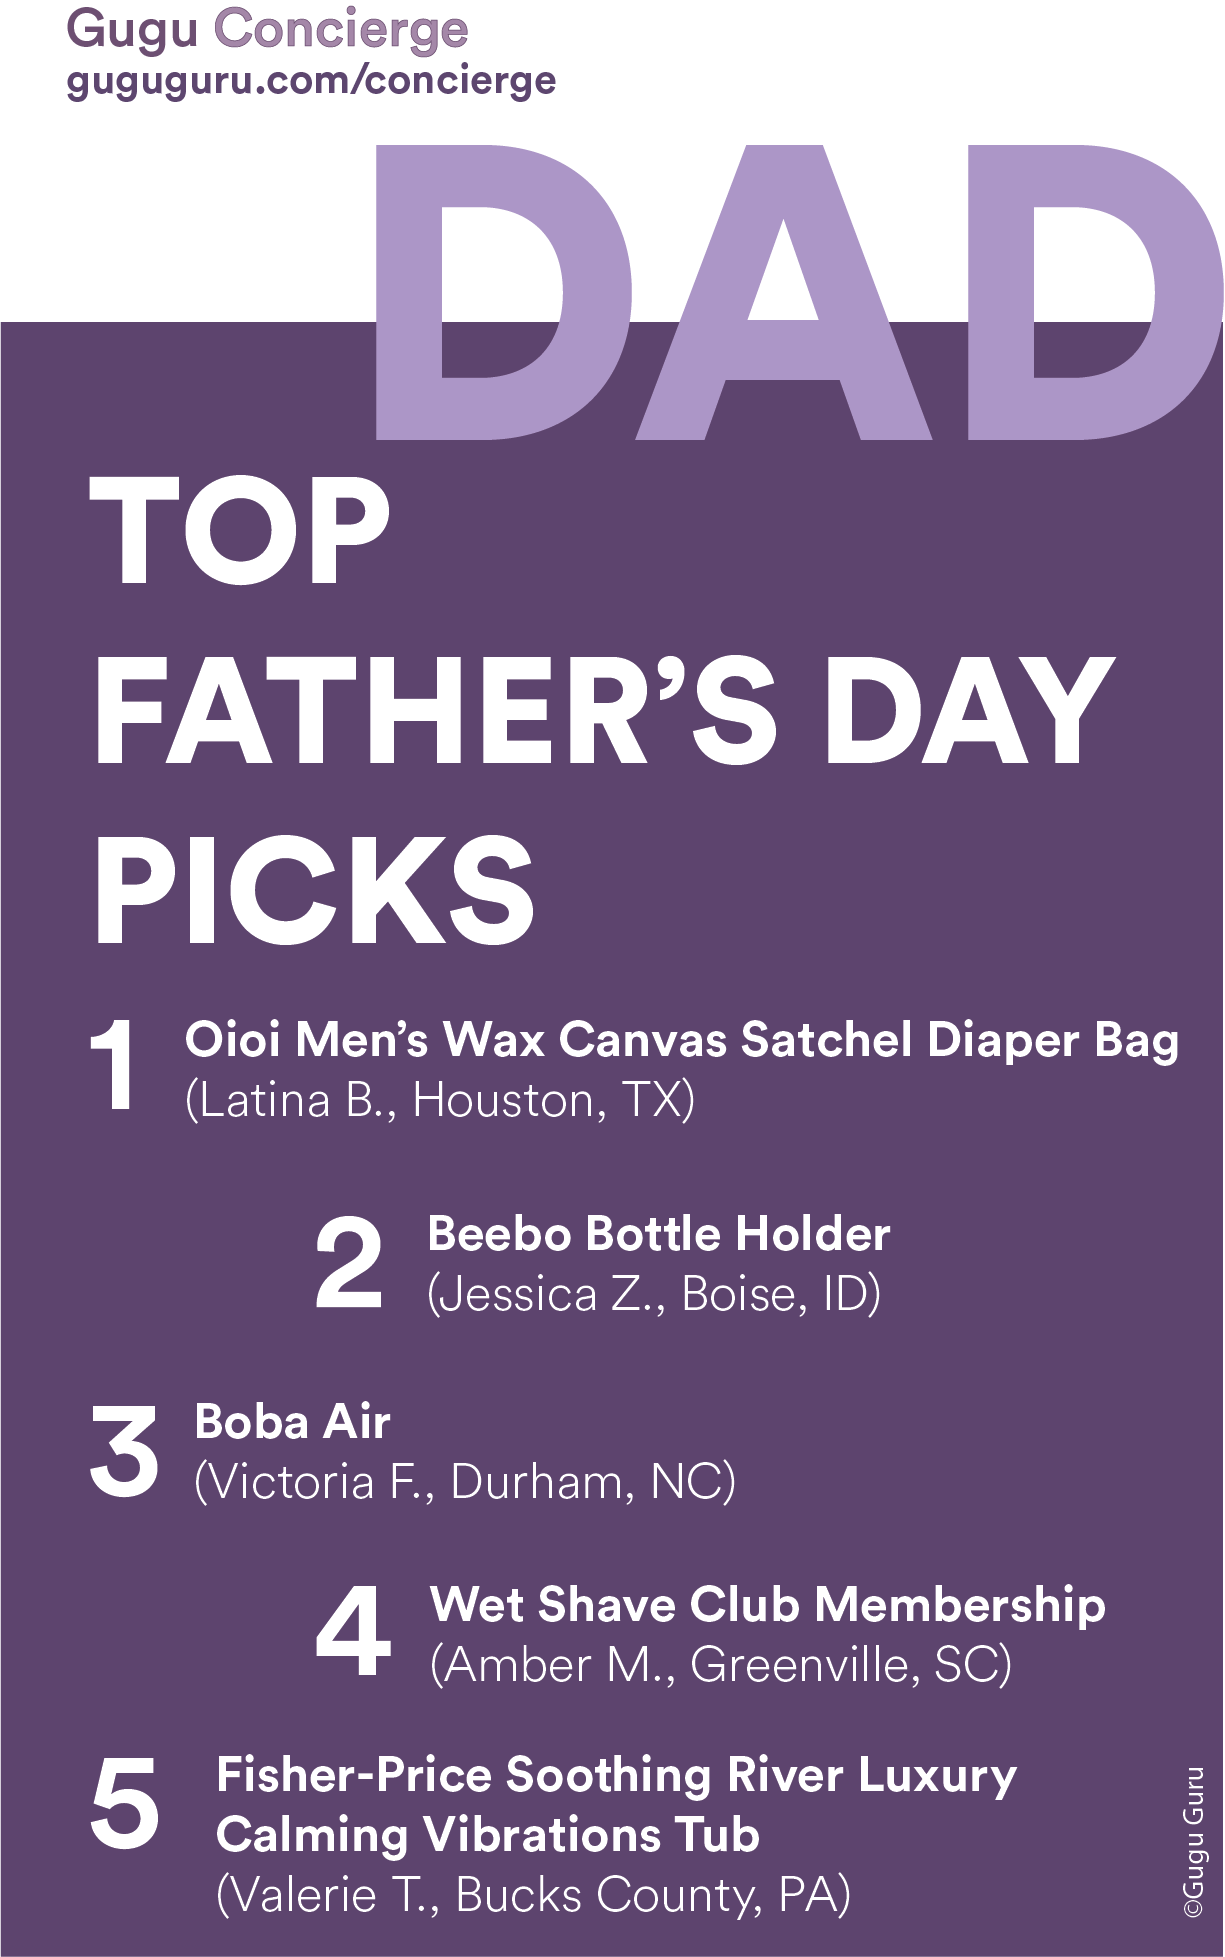 Gugu Concierge: Top Father’s Day Picks